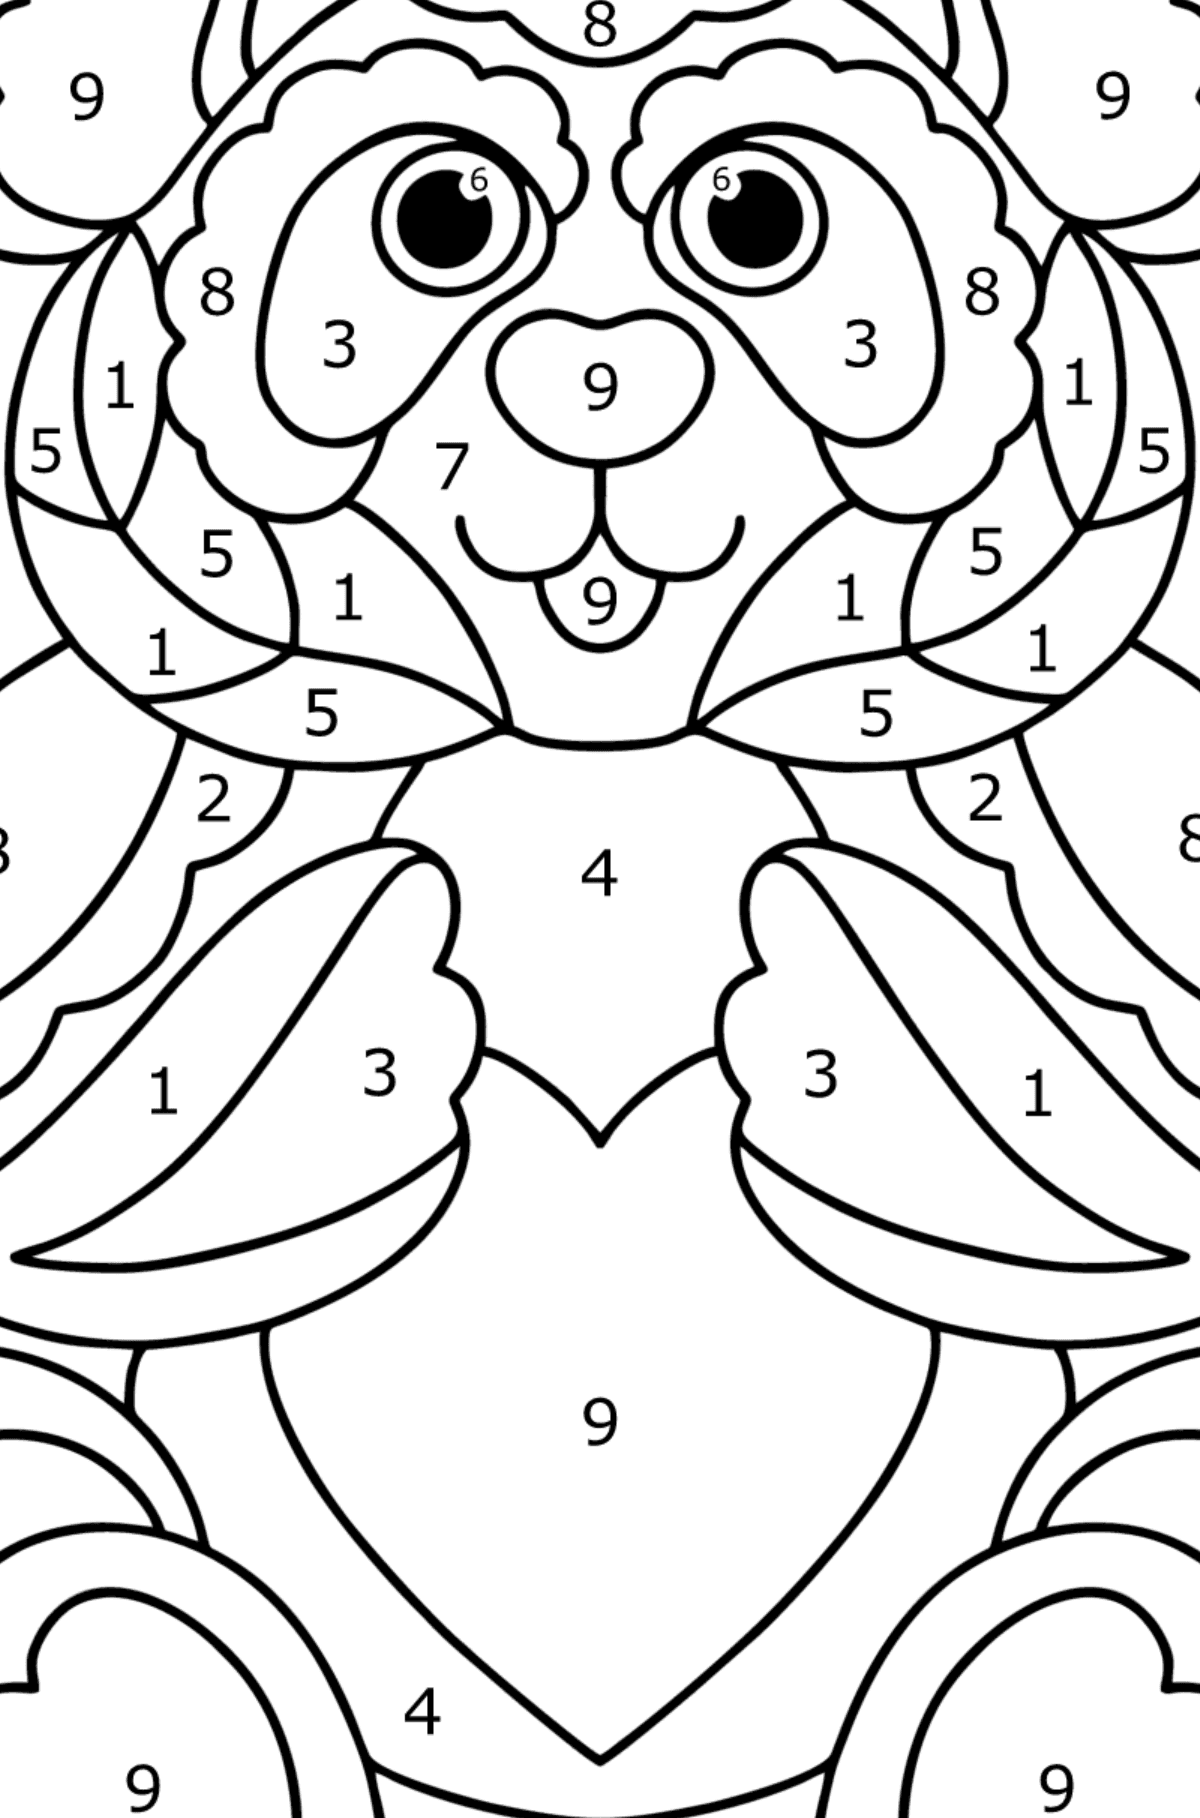 Panda antistress coloring page - Coloring by Numbers for Kids